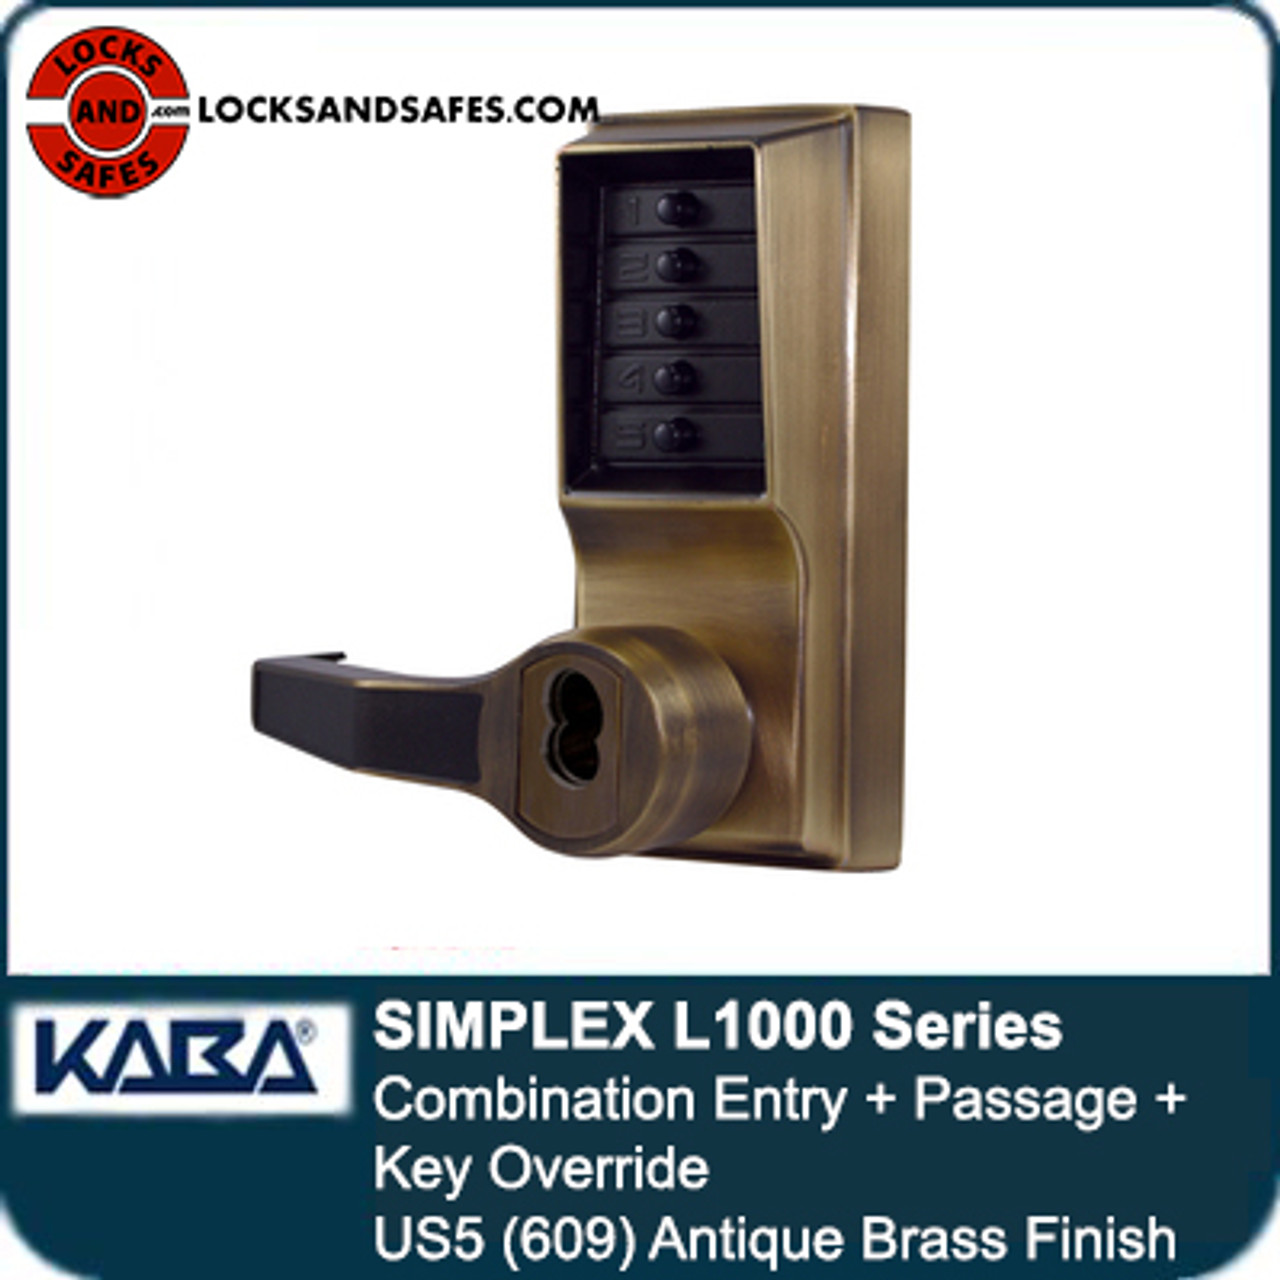 Pushbutton Lock that can be left unlocked Simplex L1000